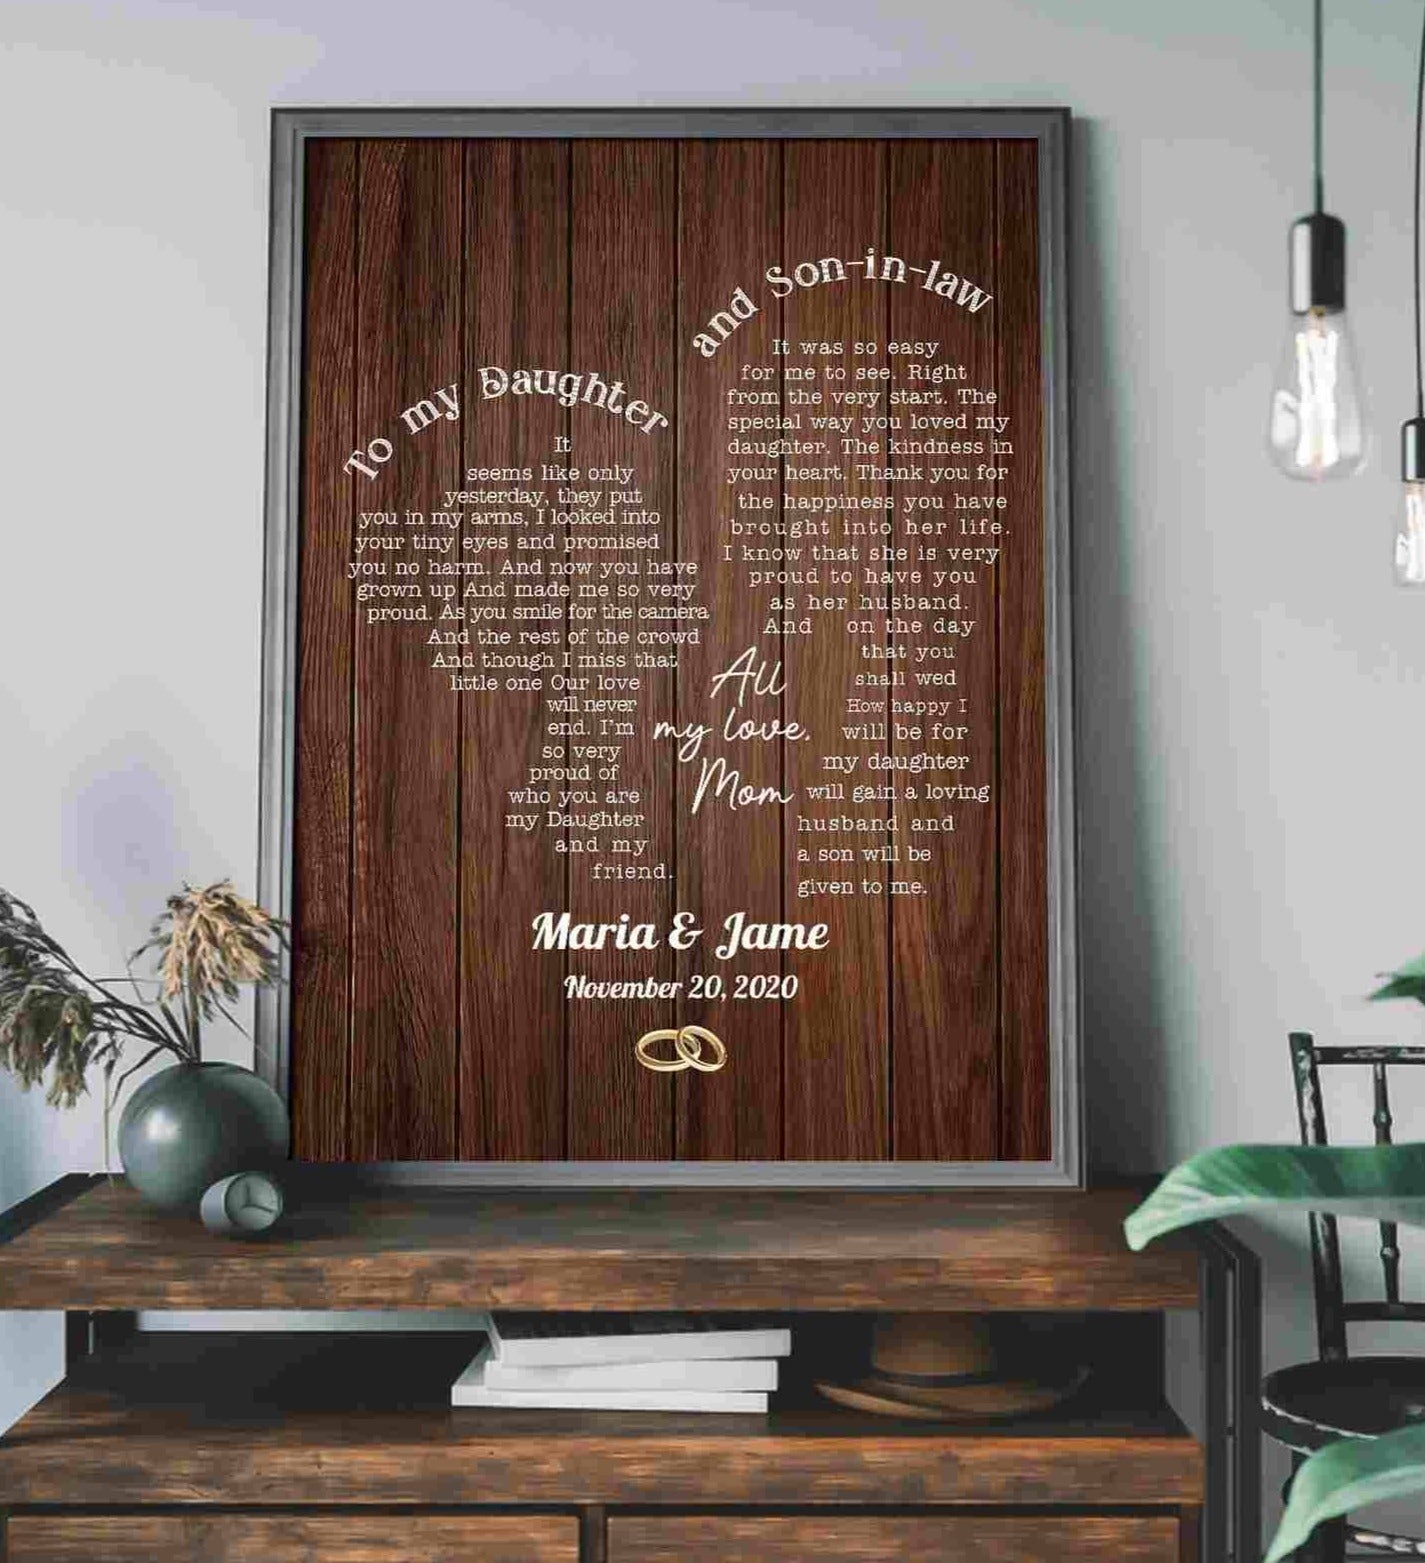 Custom Wedding Gifts For Daughter In Law & My Son, Wooden Plaque Canvas Wedding Day Gift For Bride